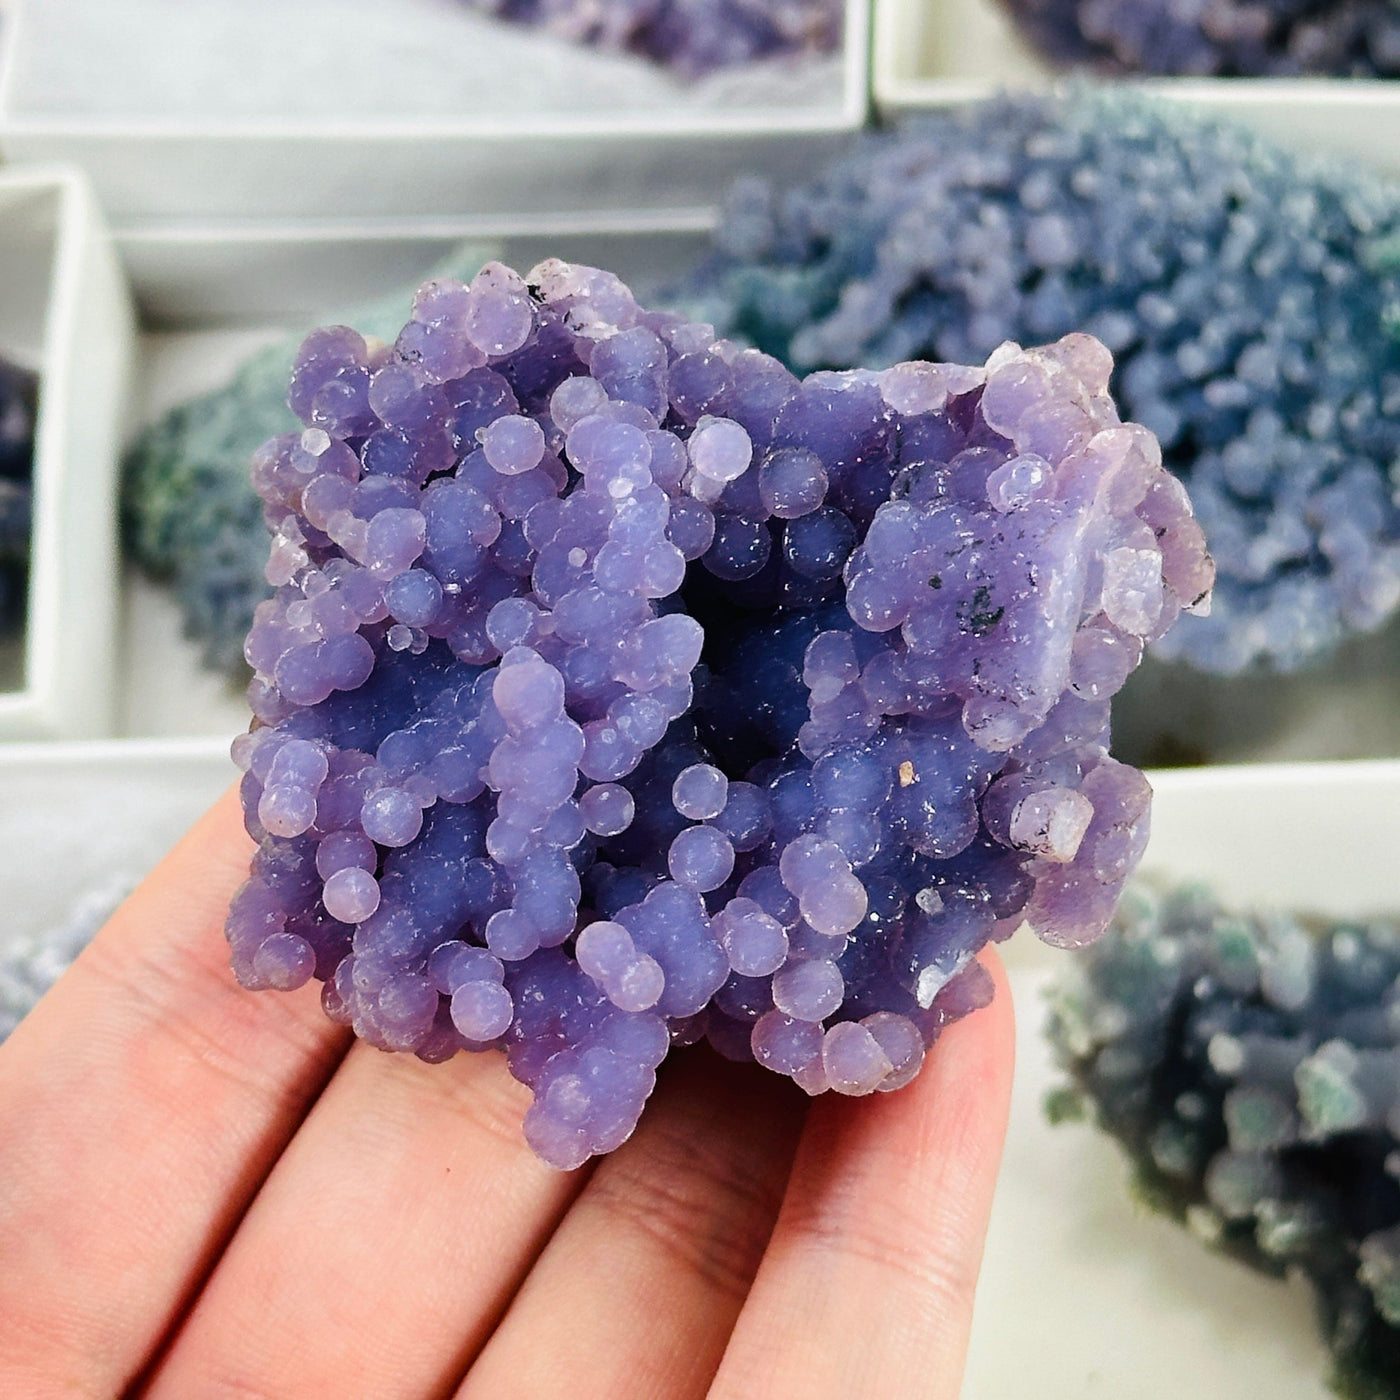 GRAPE AGATE WITH DECORATIONS IN THE BACKGROUND